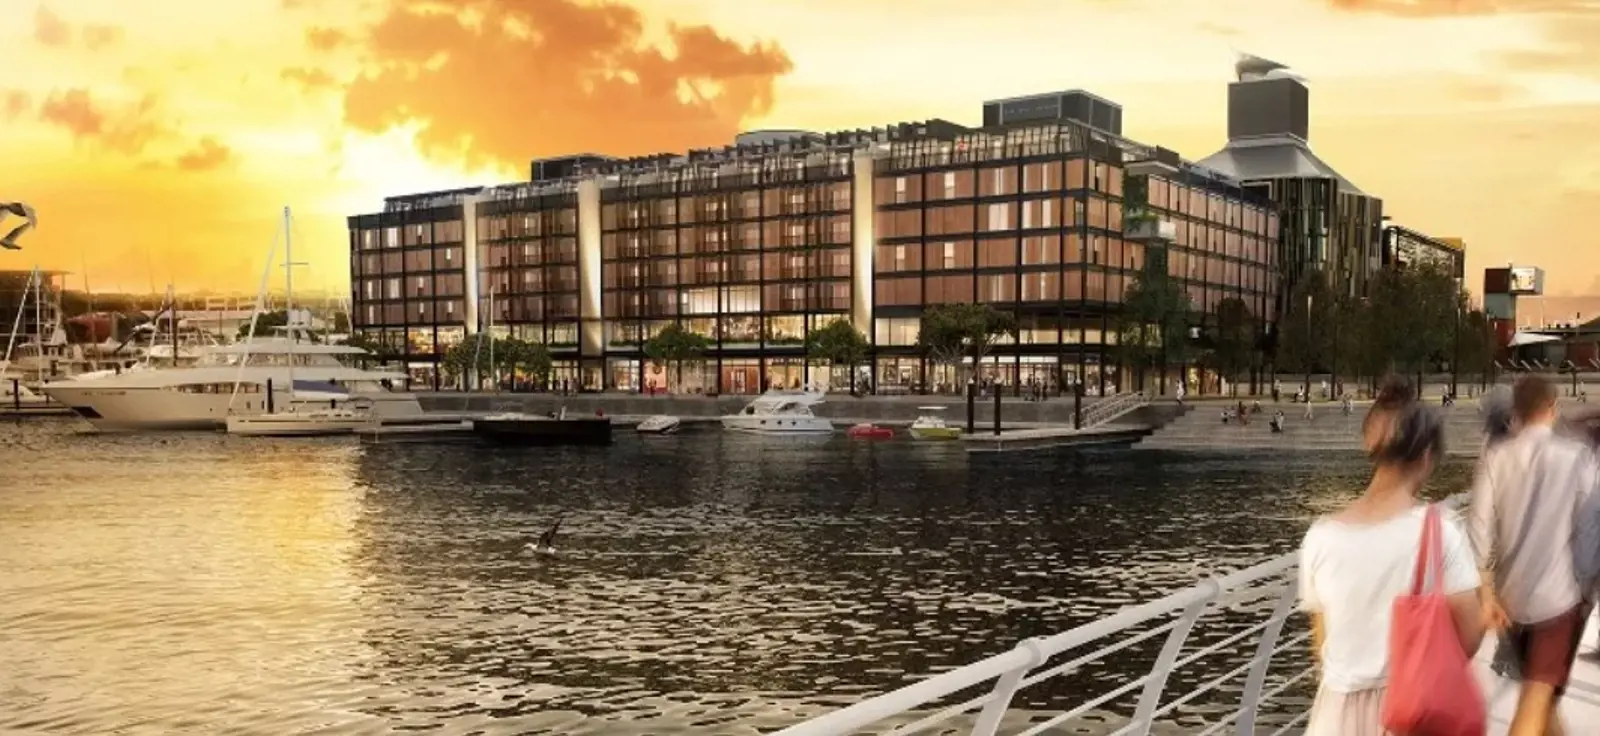 Prime Minister Breaks Ground For $200M Luxury Hotel On Auckland’S Waterfront